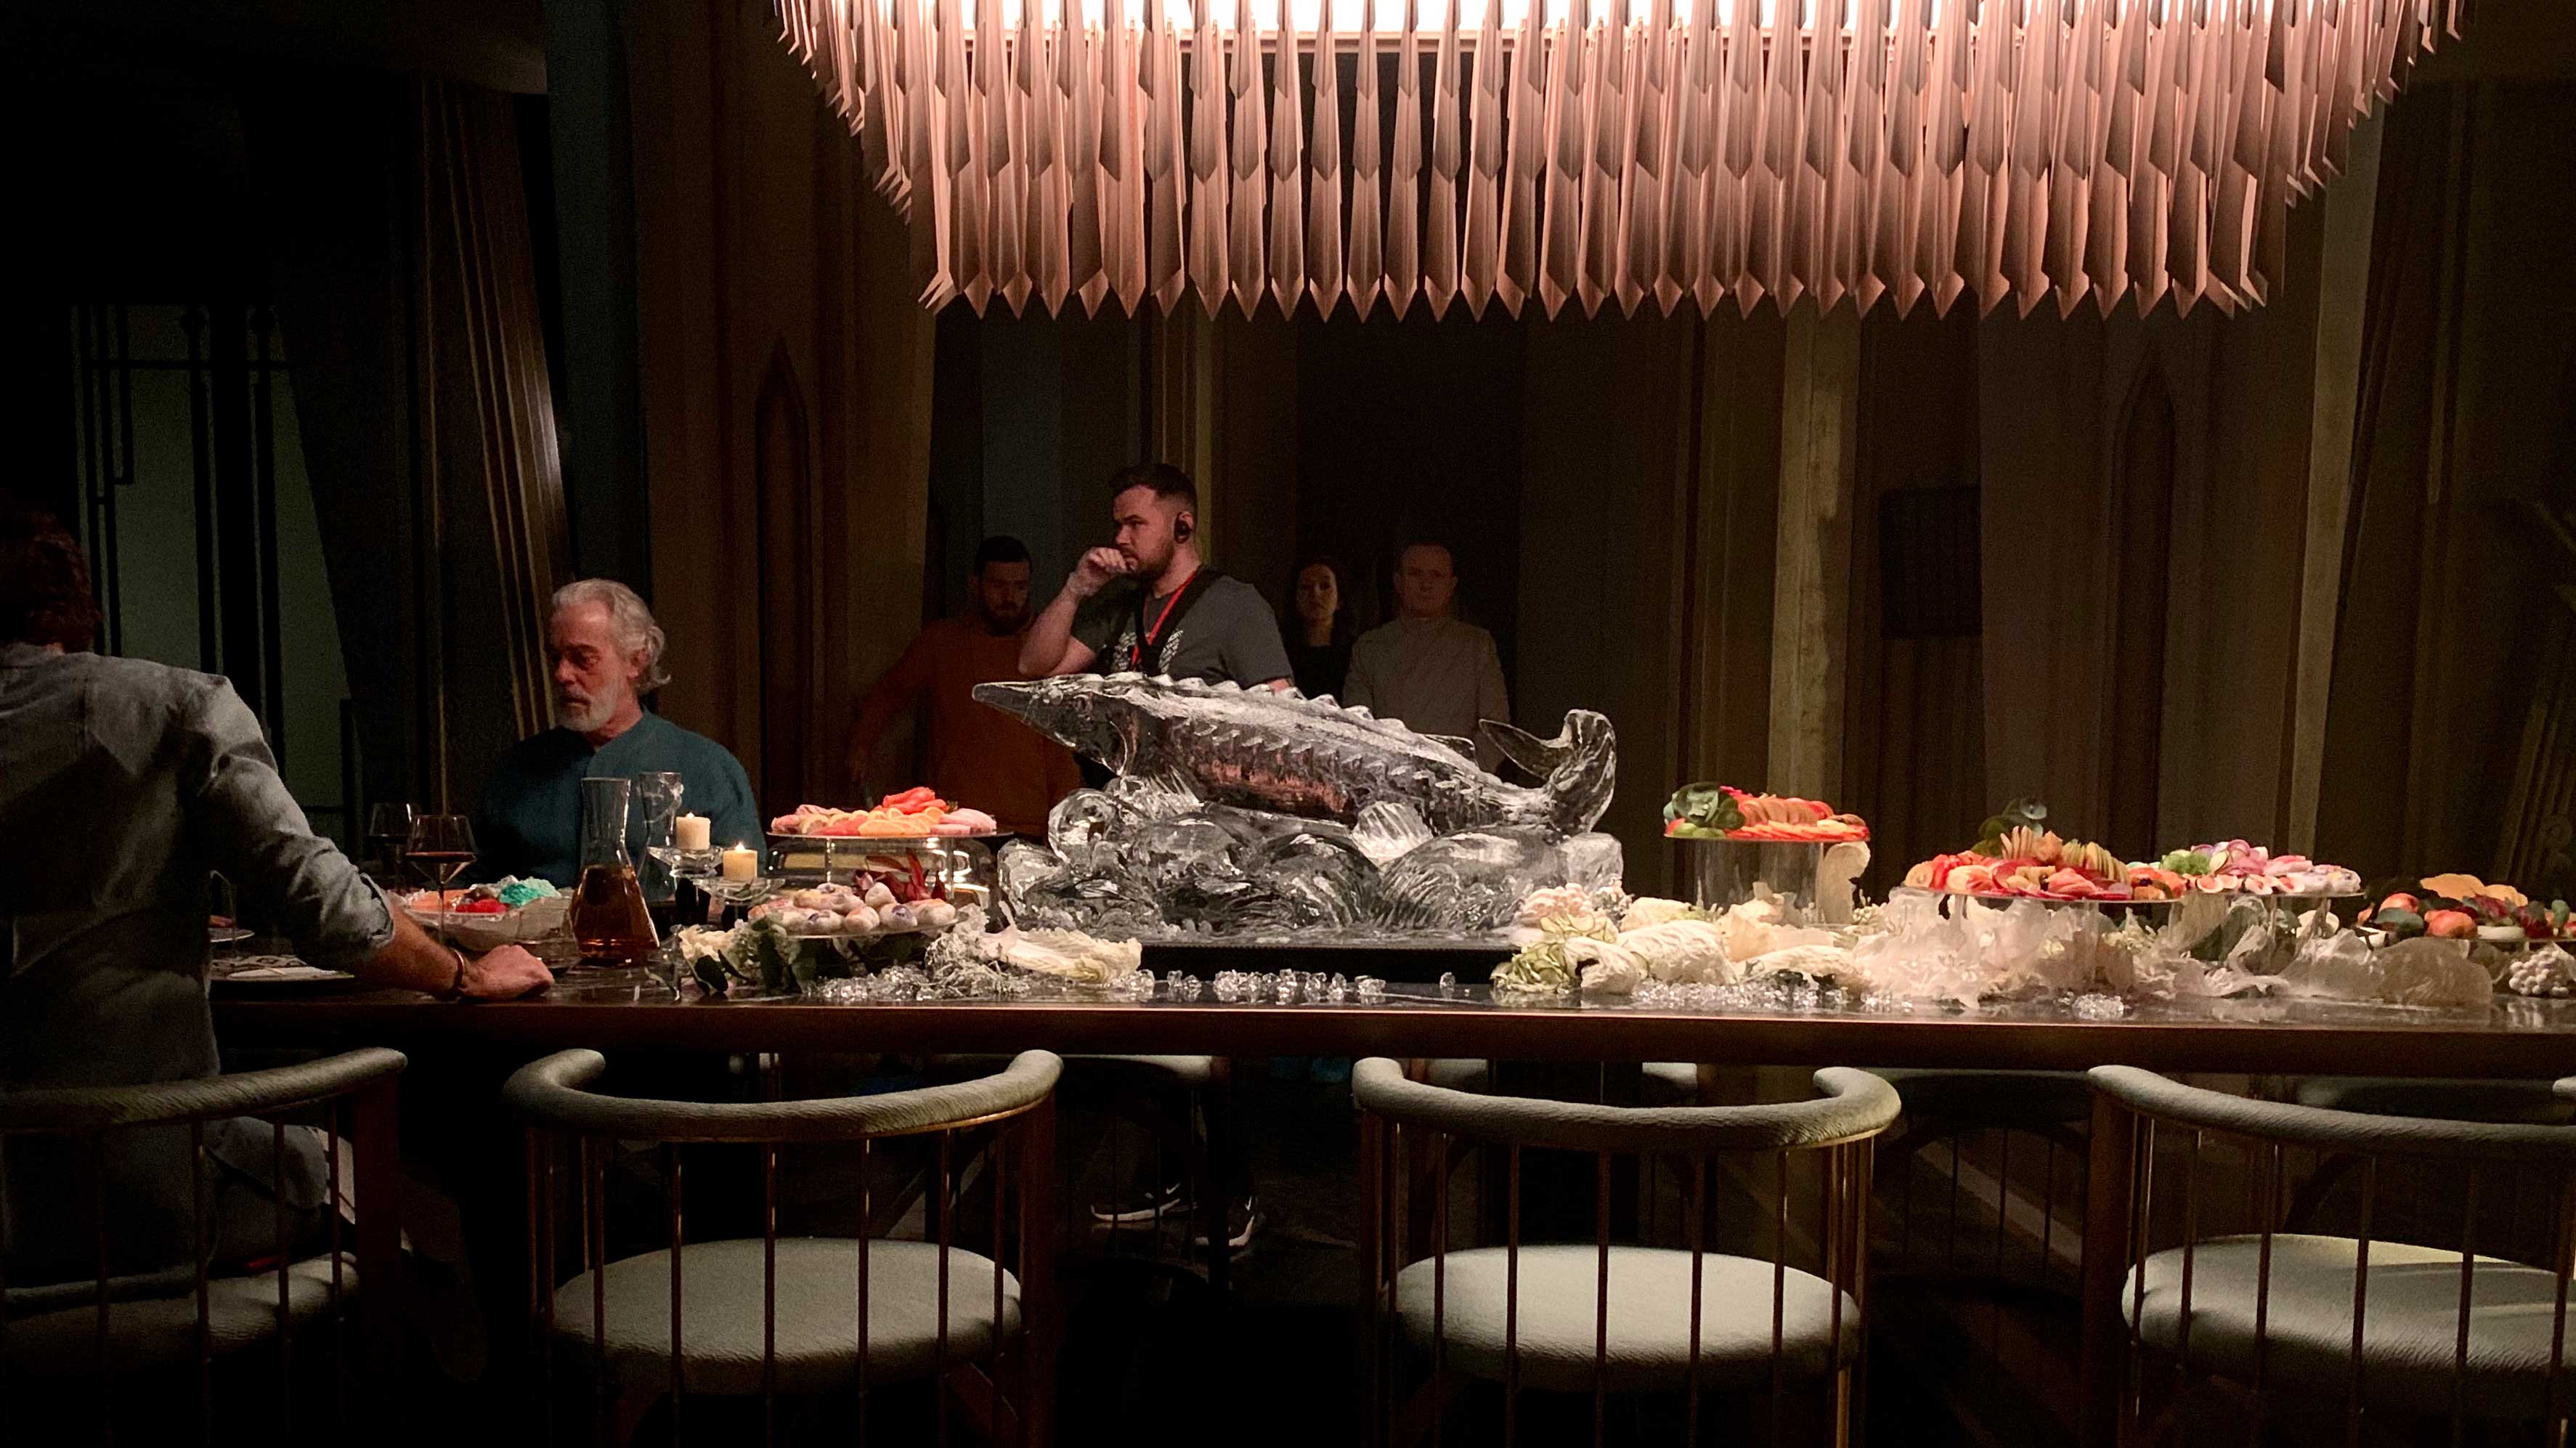 An elaborate tablescape under a chandelier sits on a film set, with two actors seated and a man directing behind him.